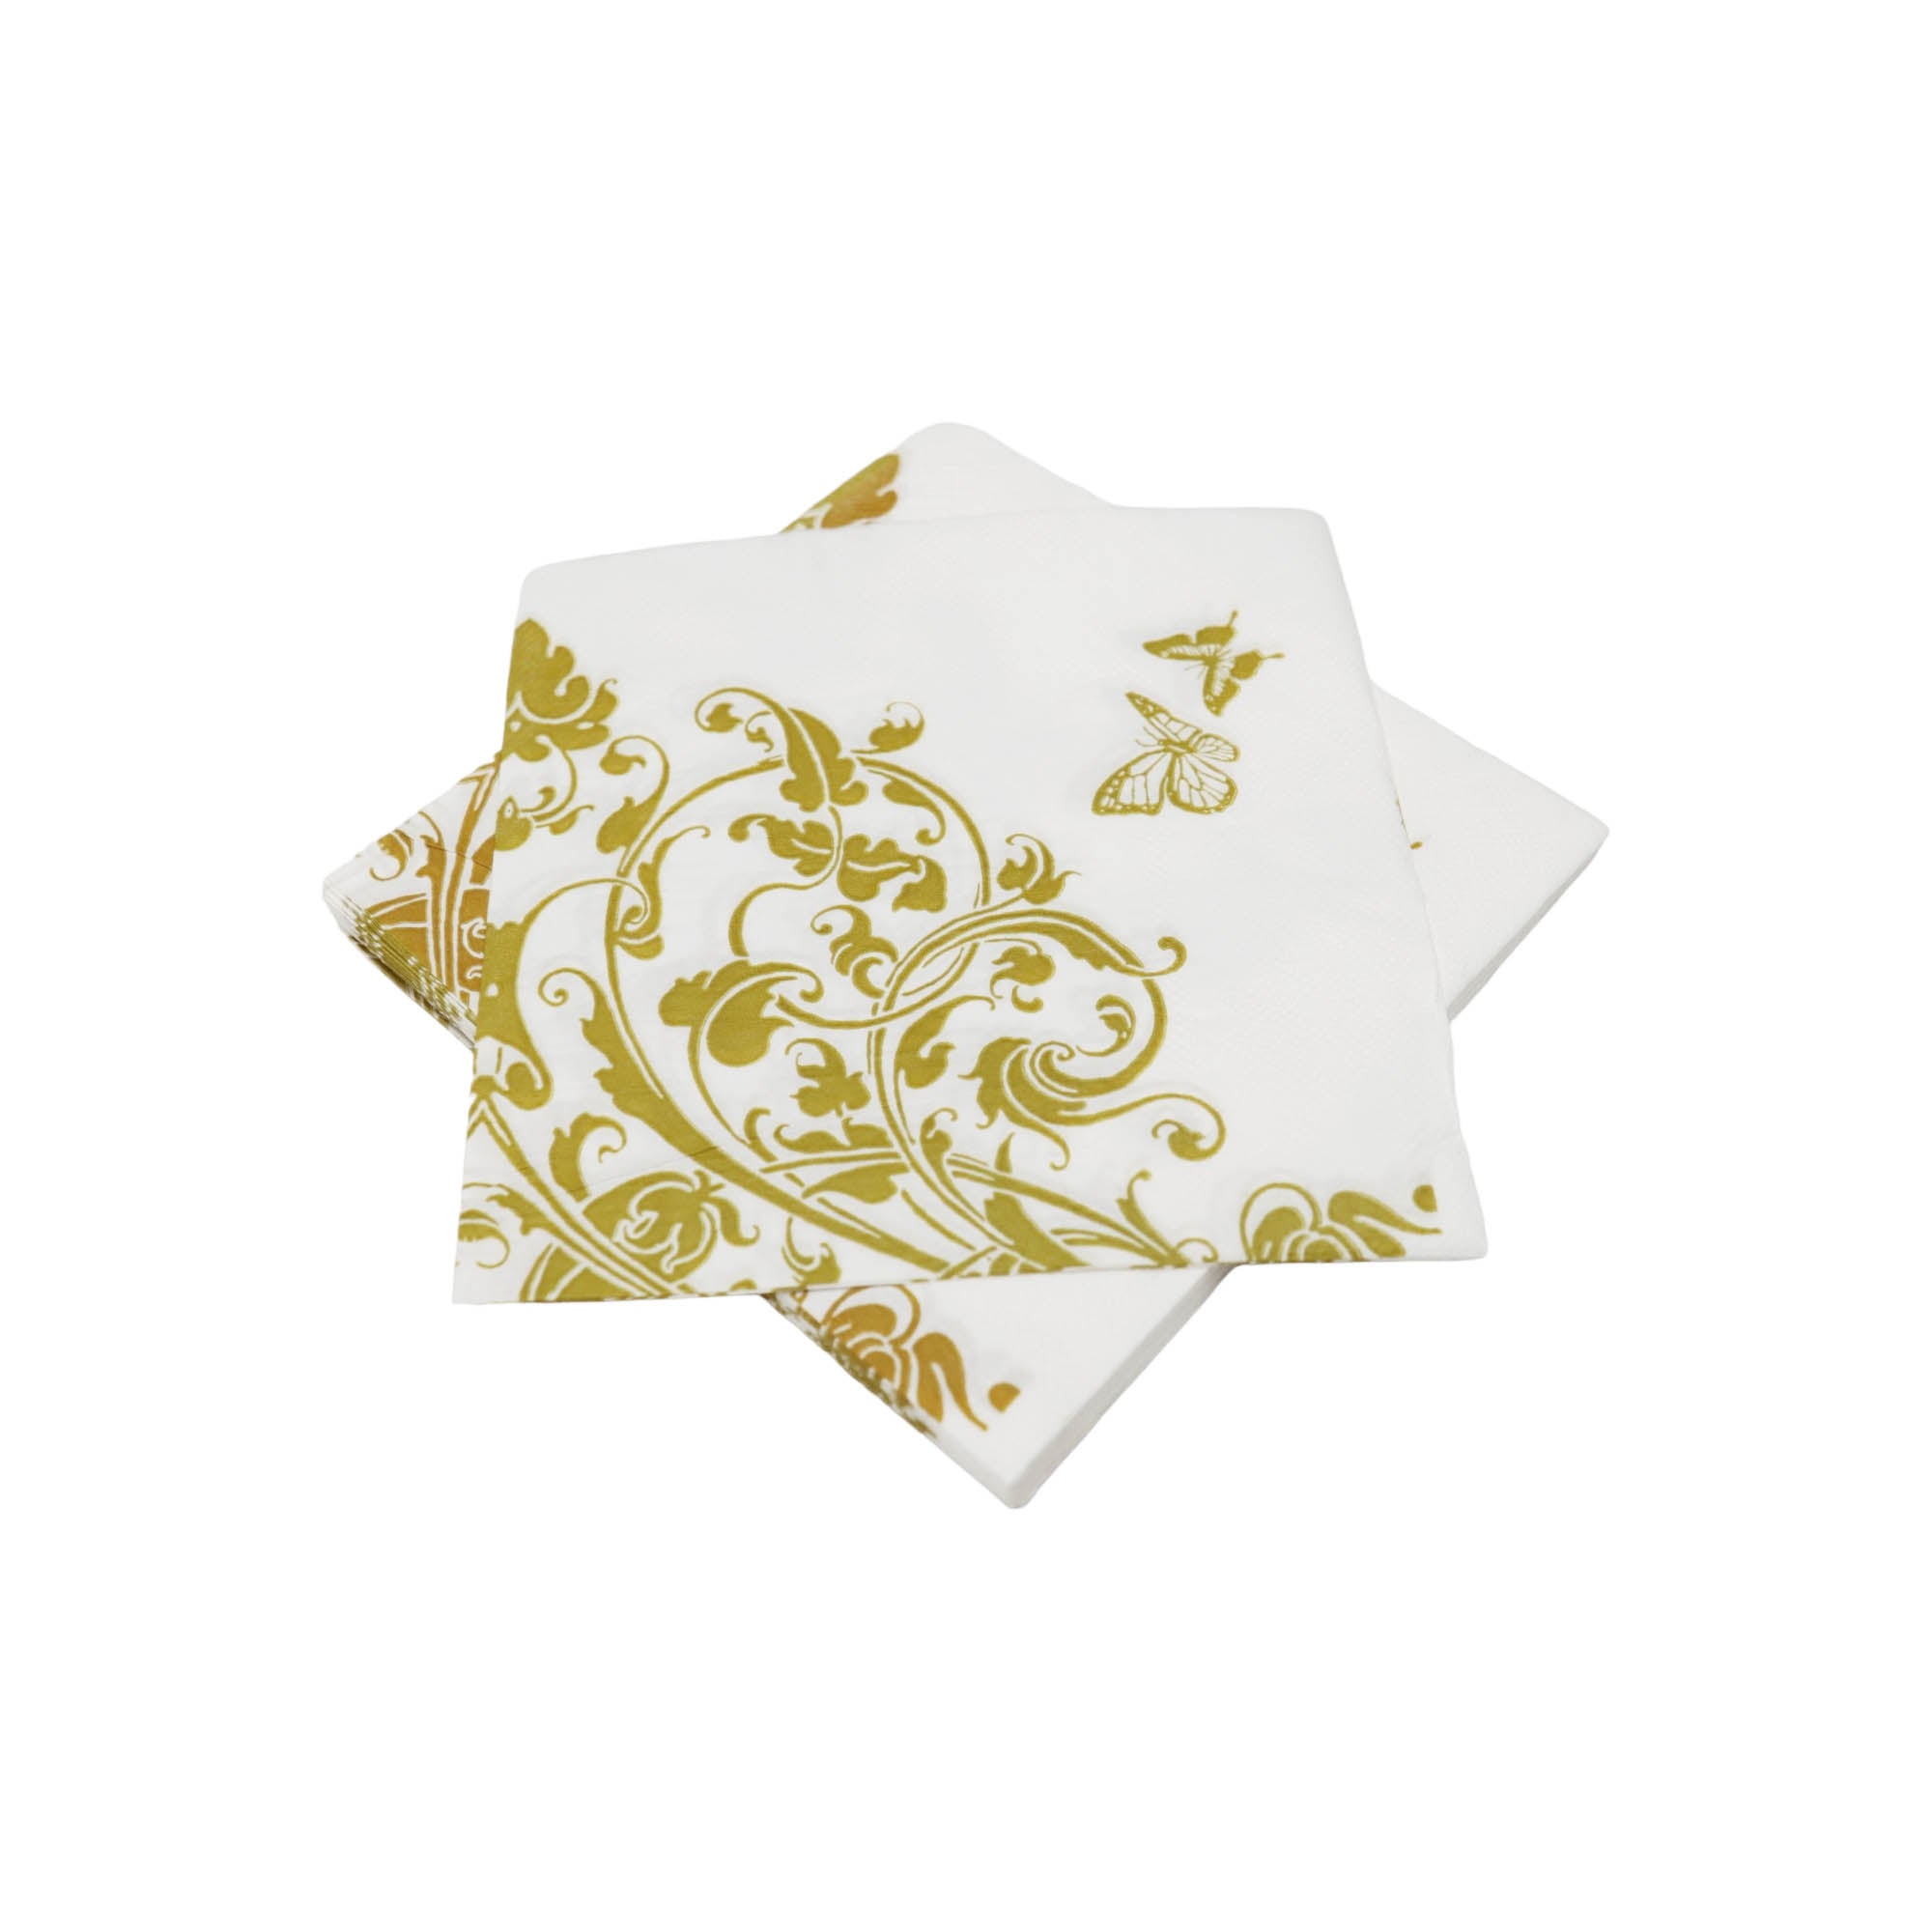 Luncheon Designer Serviette White with Gold Silver Floral Print 10pack